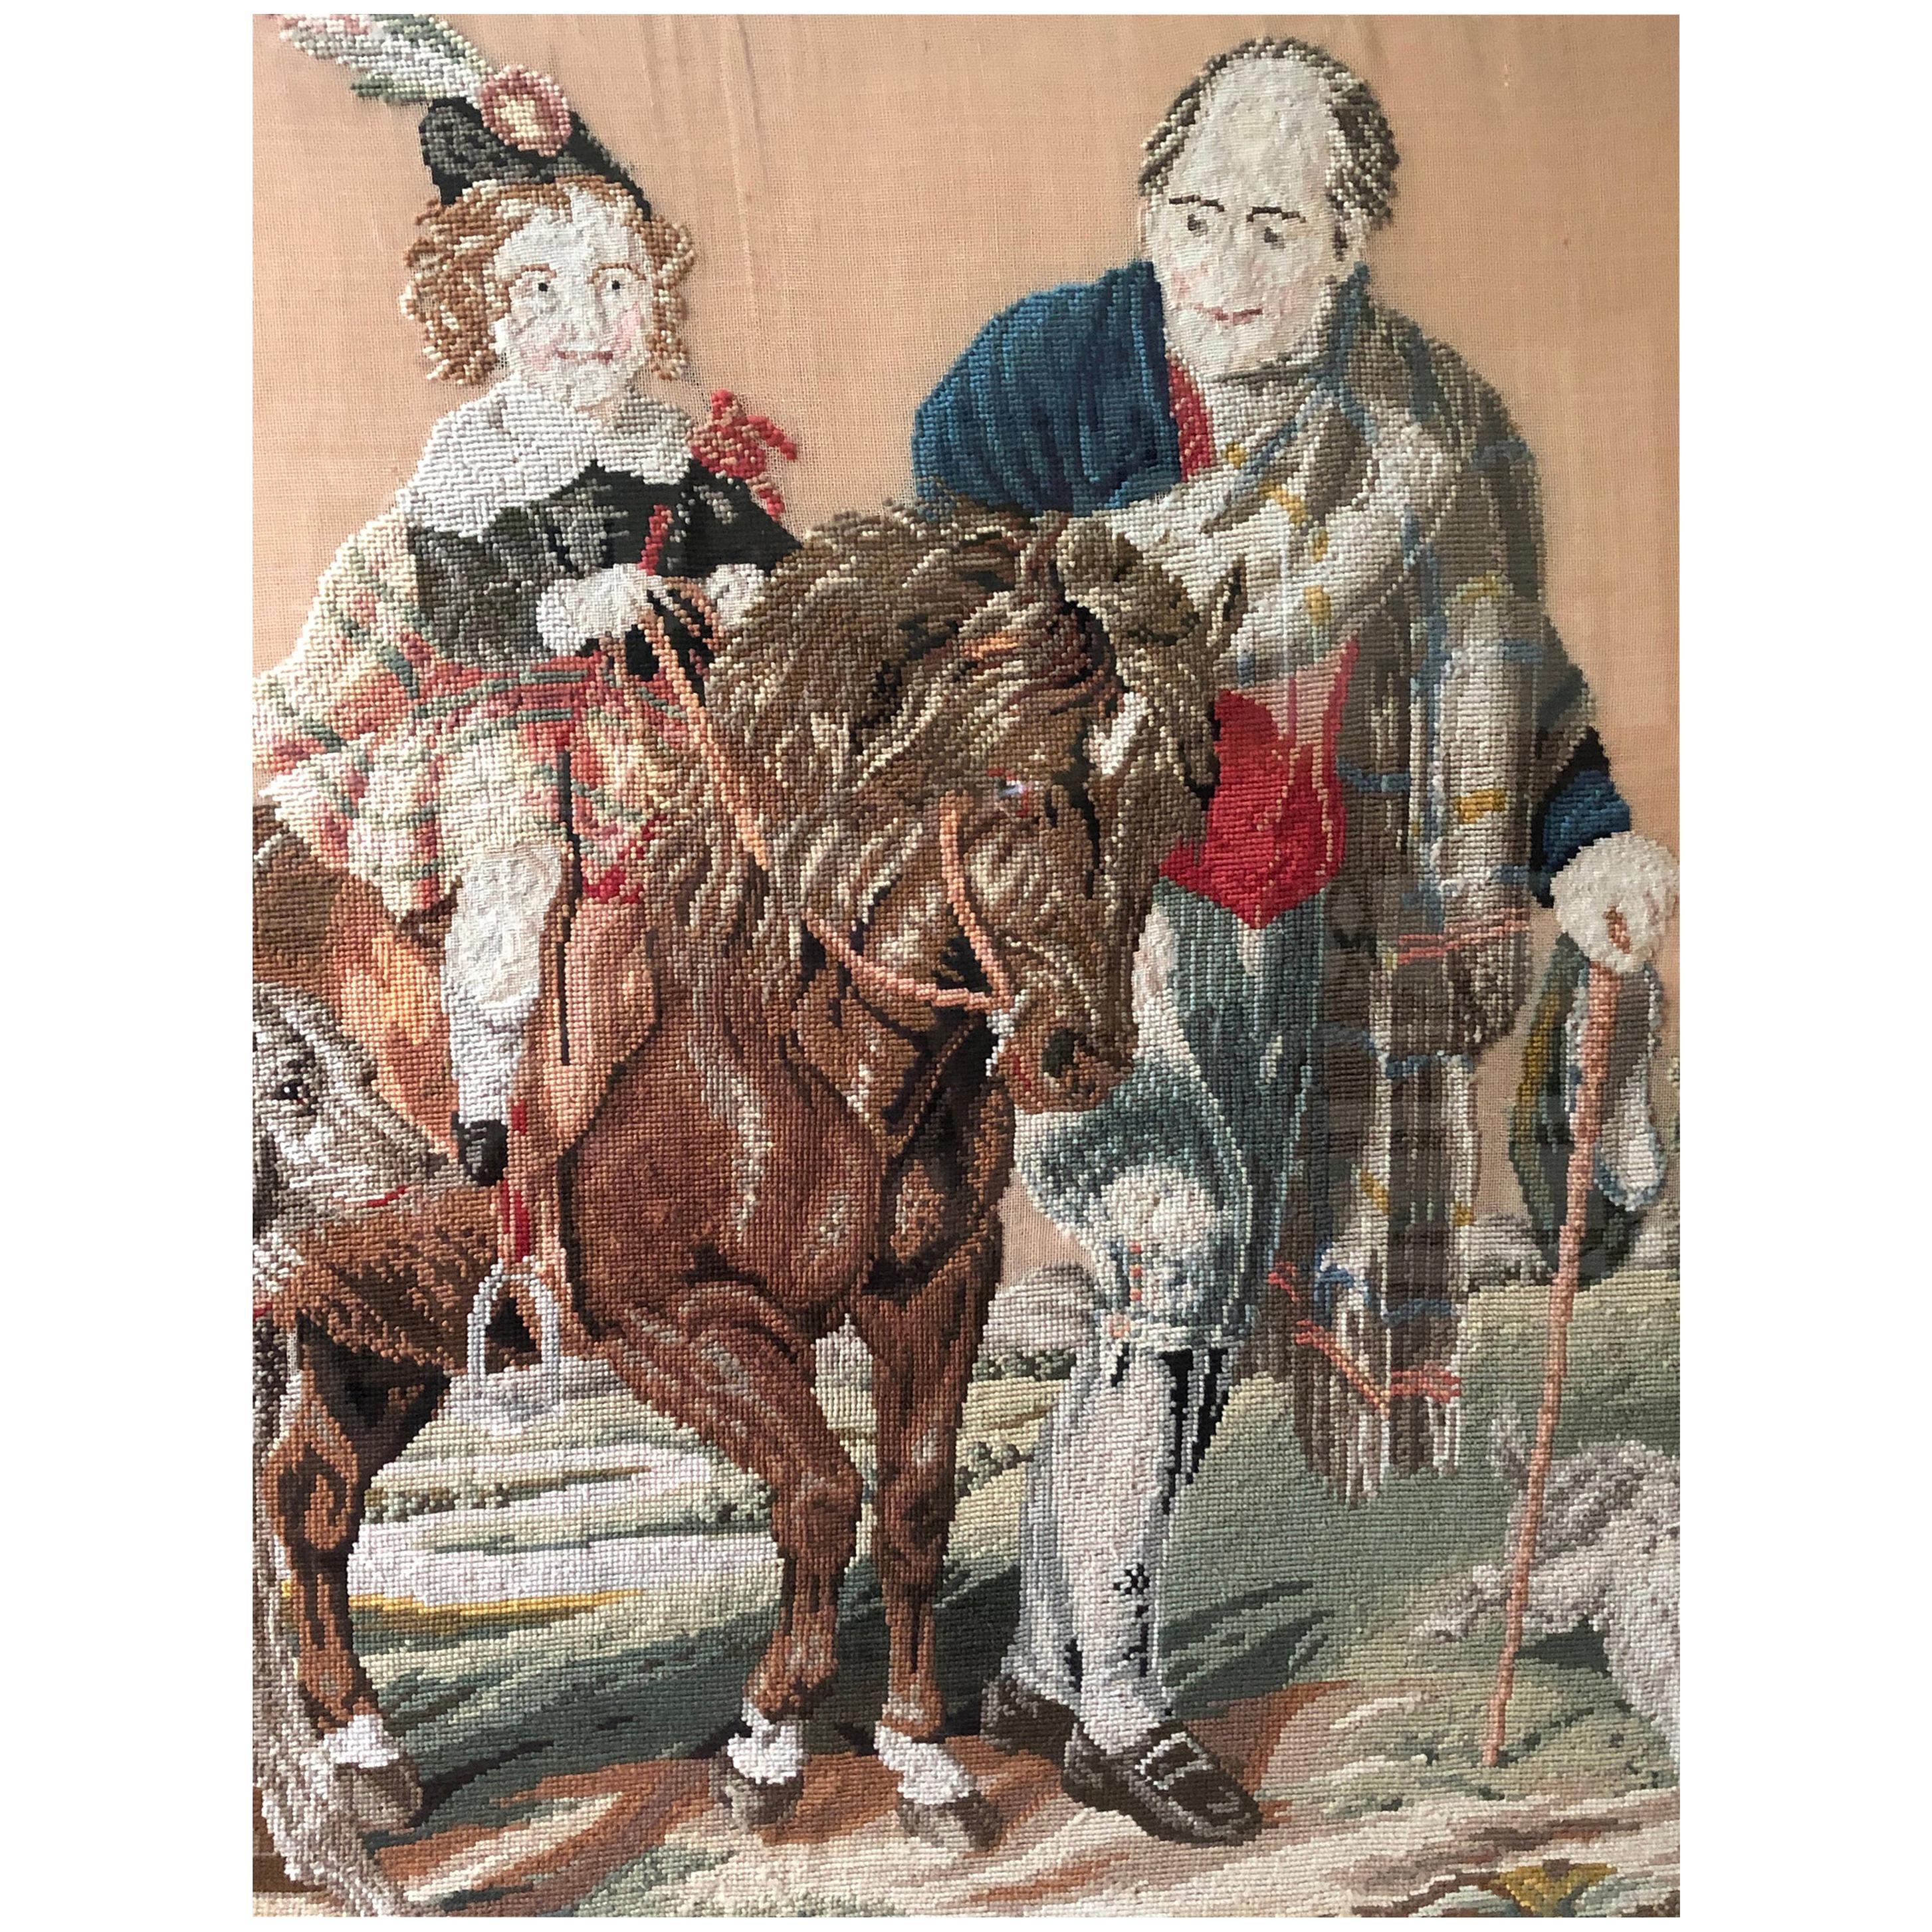 Prince Albert on His Pony Framed Needlepoint For Sale